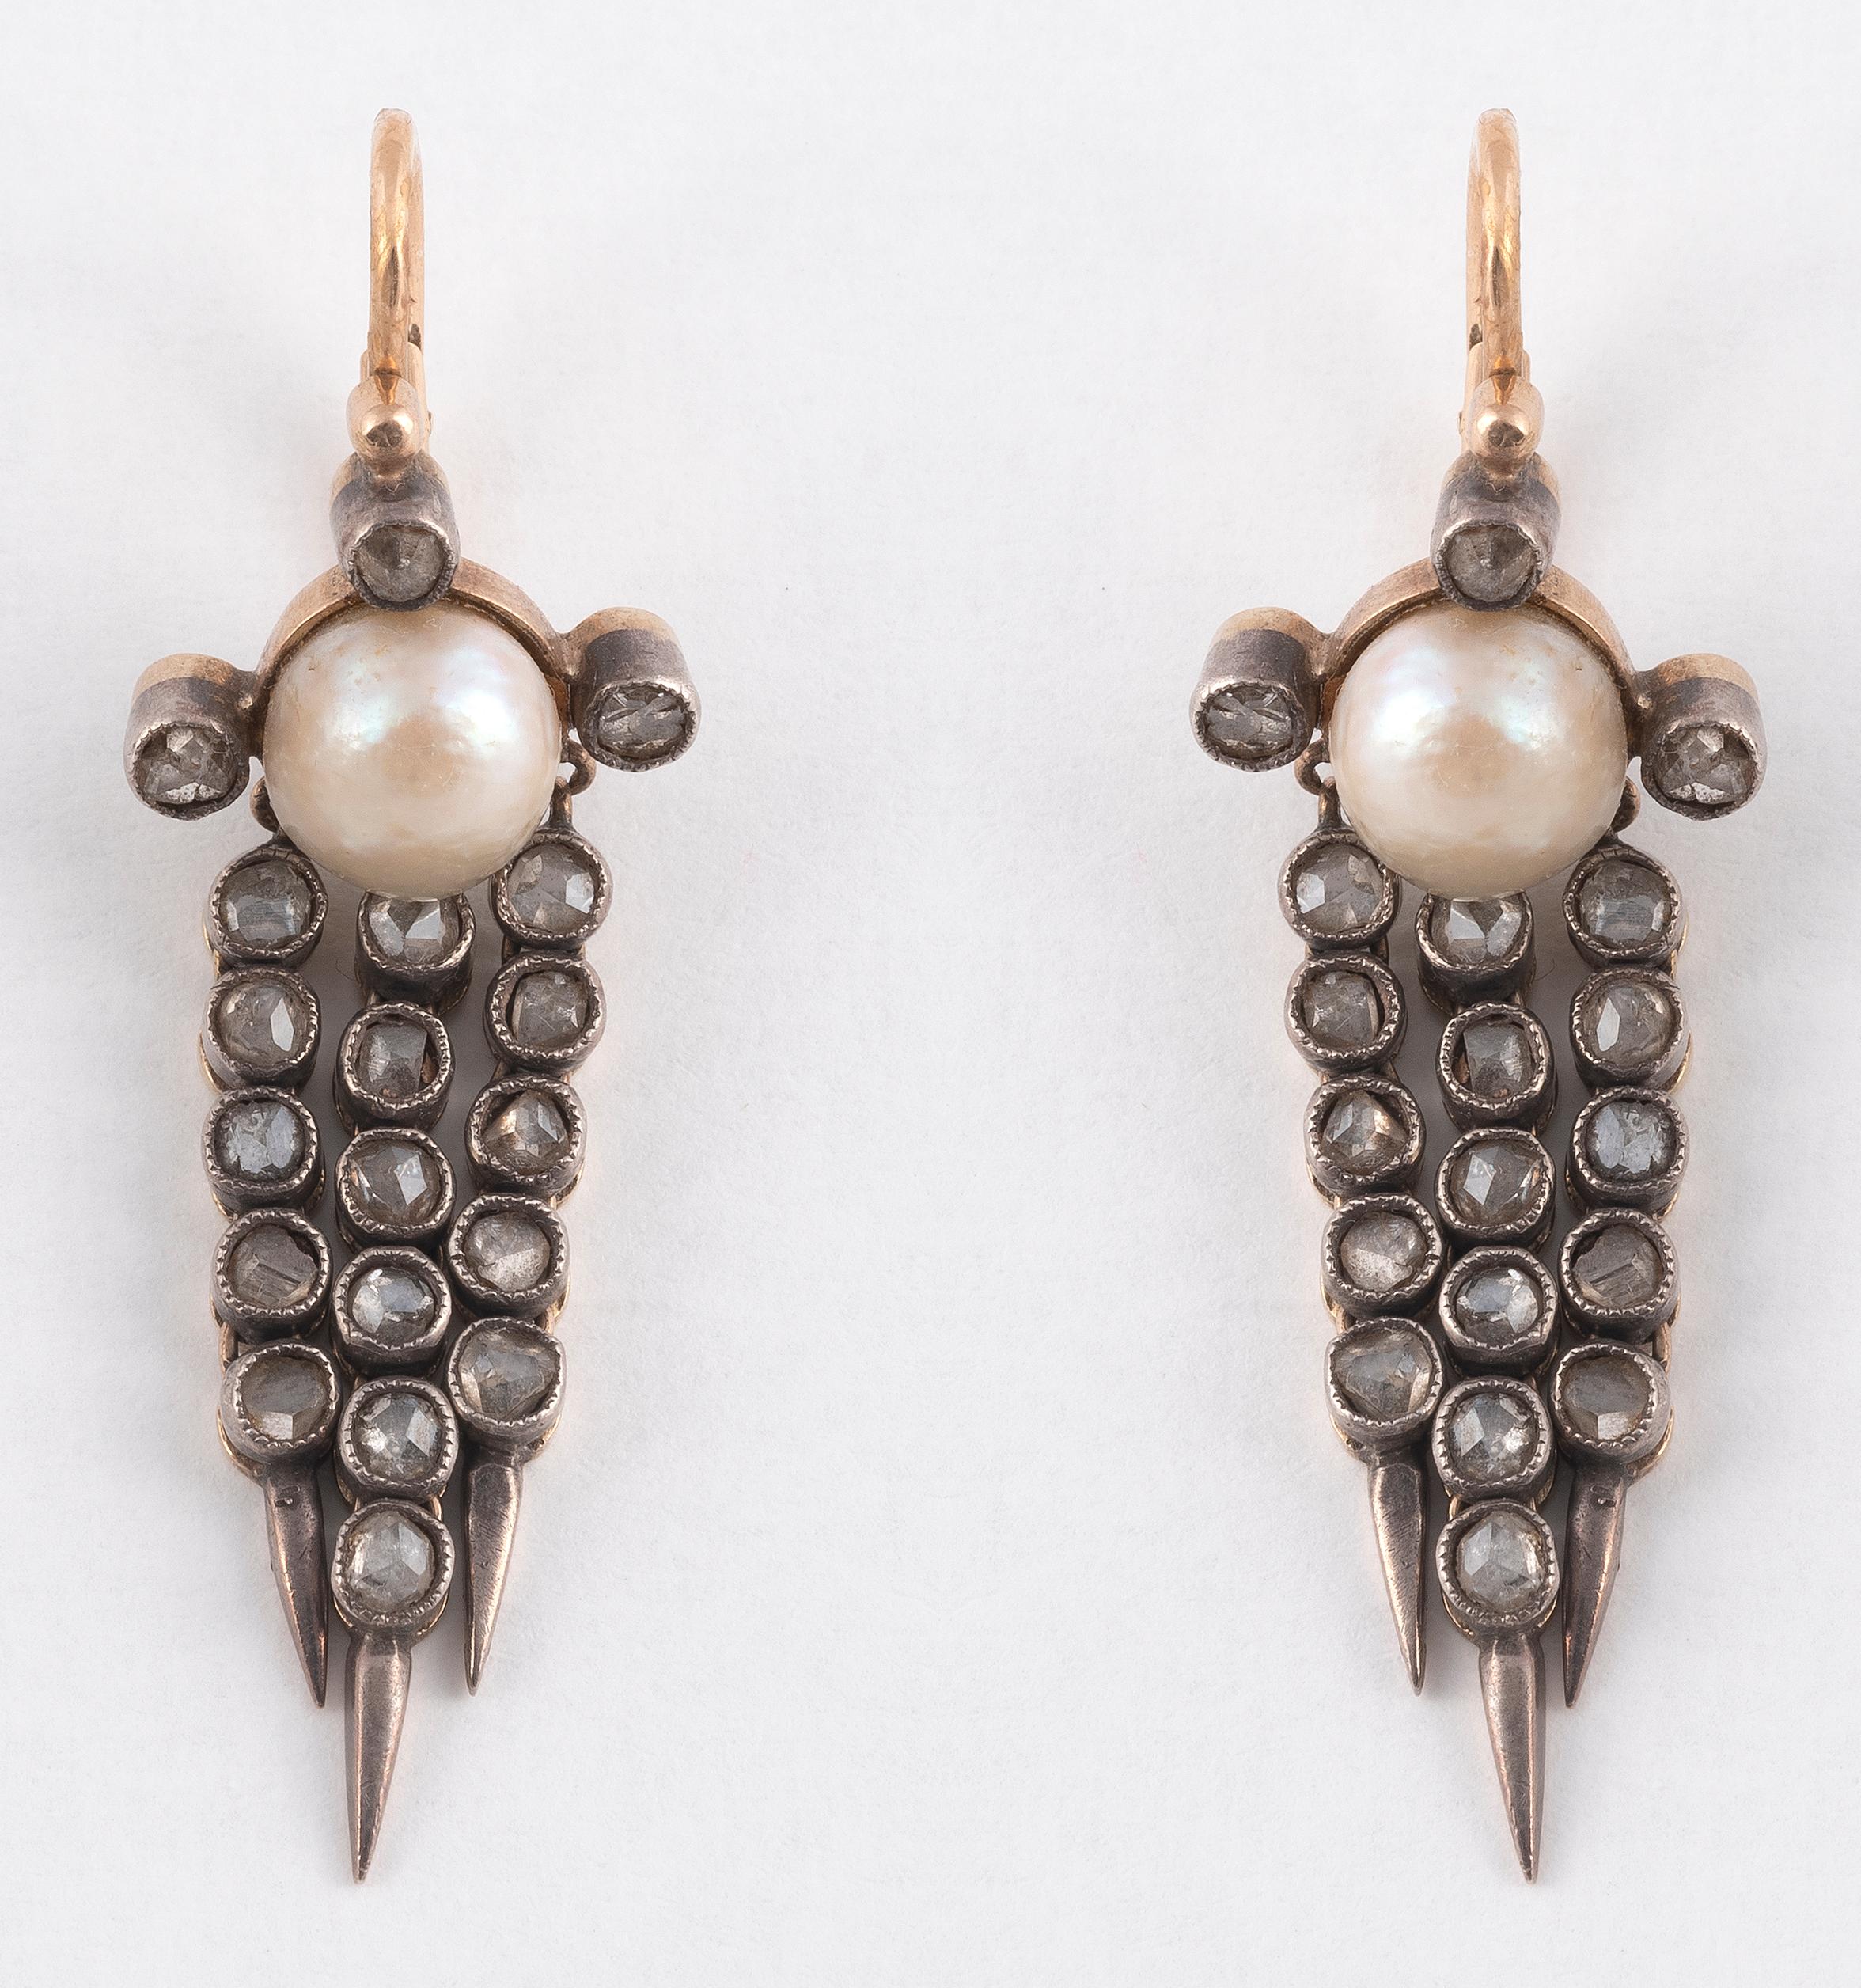 Each earring top featuring a natural pearl measuring approximately 7.00mm, with rose cut diamond-set fringe.
Lenght: 44mm
Weight: 6,8gr.